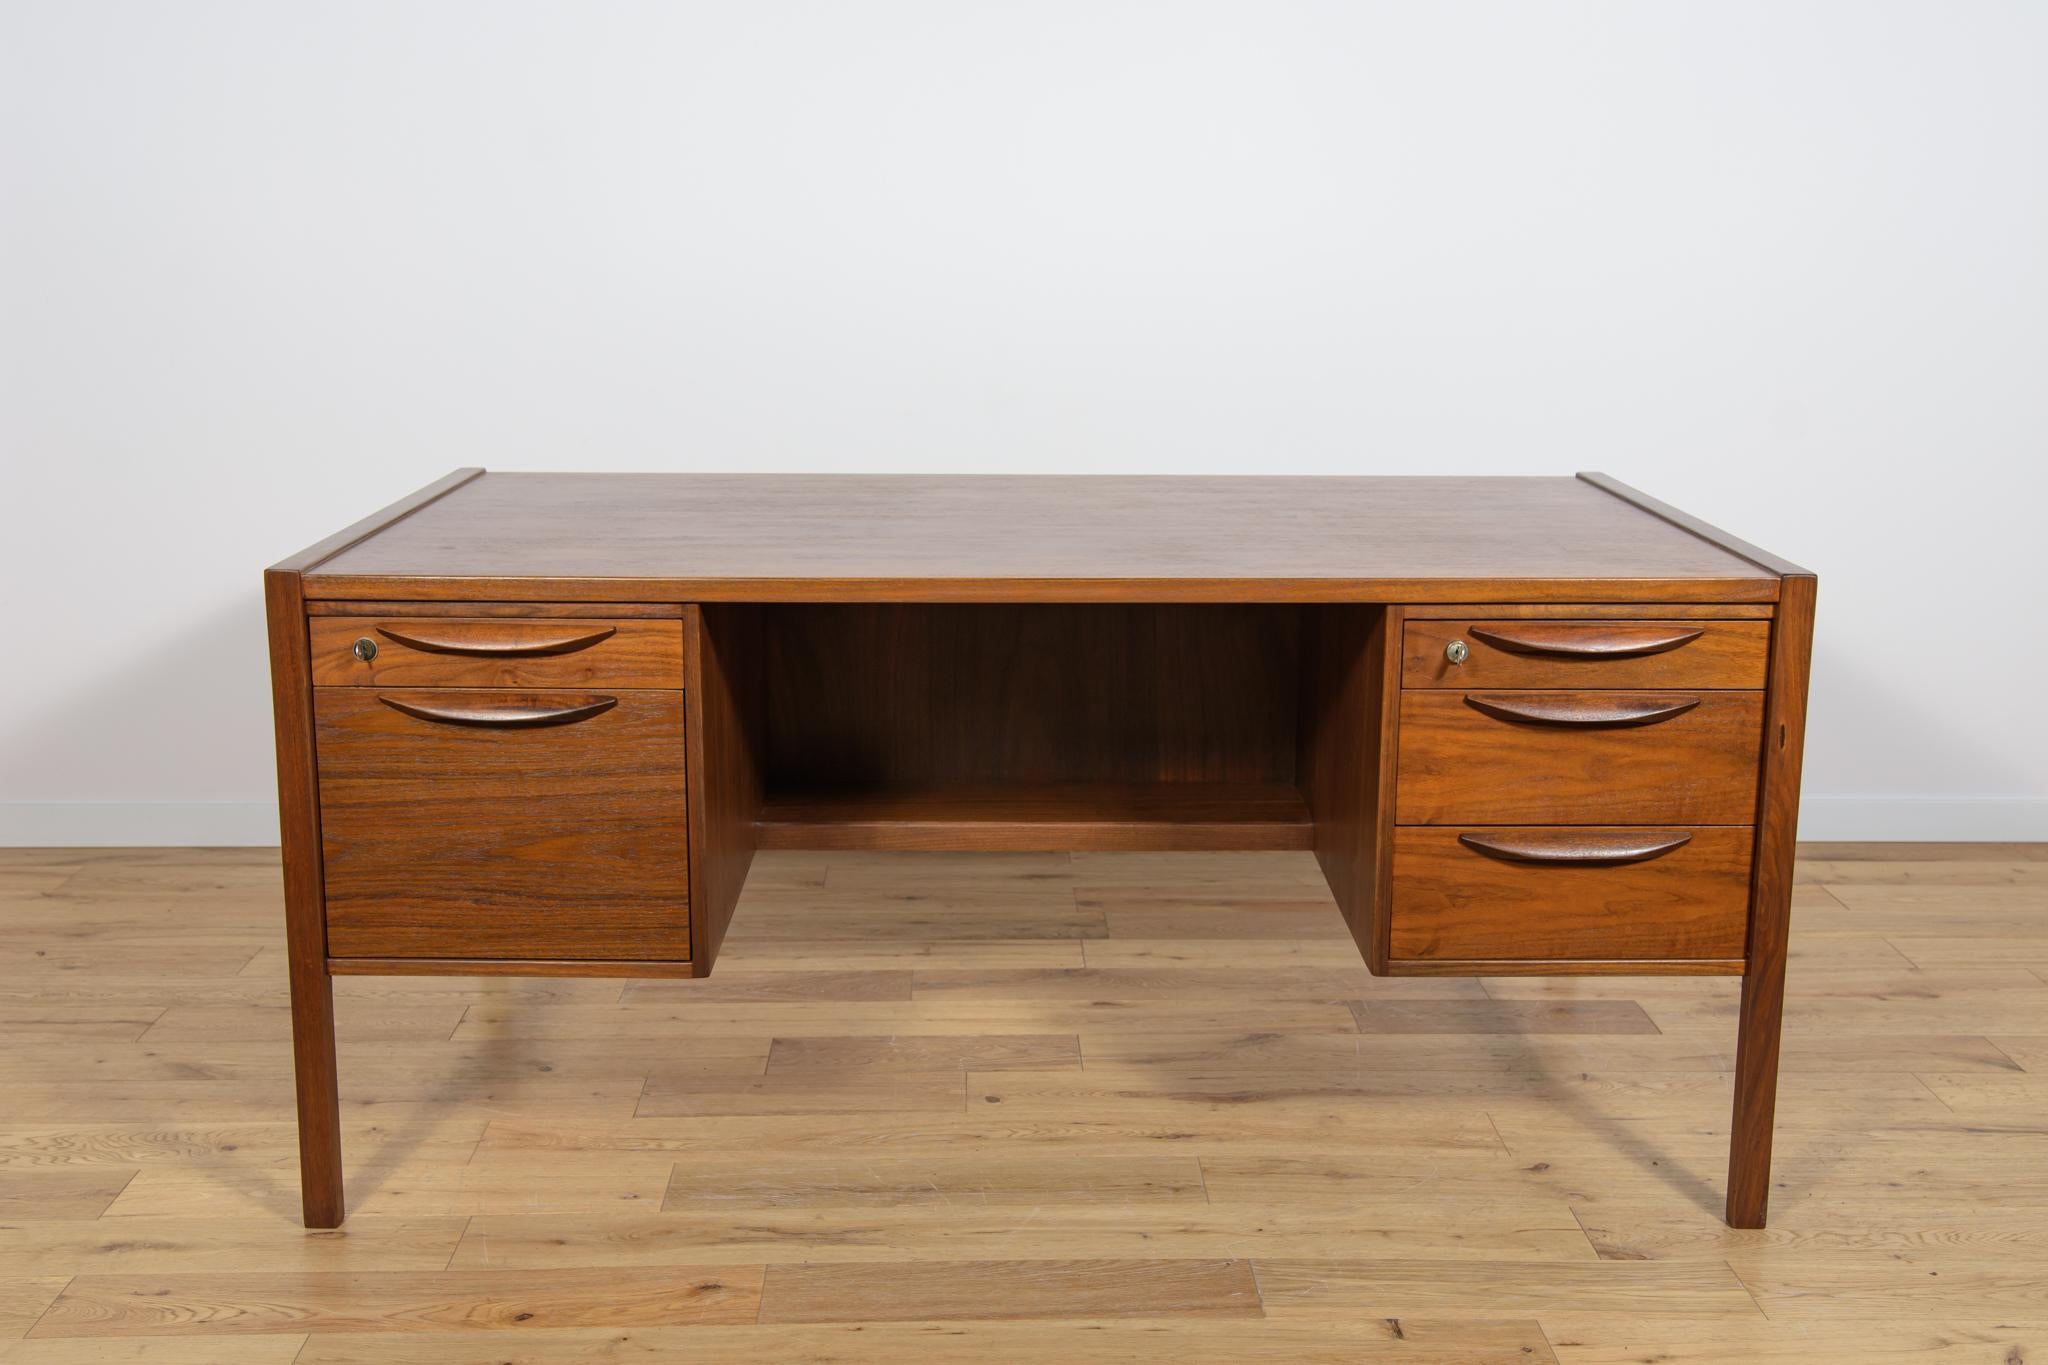 A large desk made of walnut wood from the 1960s, designed by Jens Risom for the American manufactory Jens Risom Design. Desk with two drawer modules. There are two drawers in the left module, and three drawers in the right module, locked with a key.